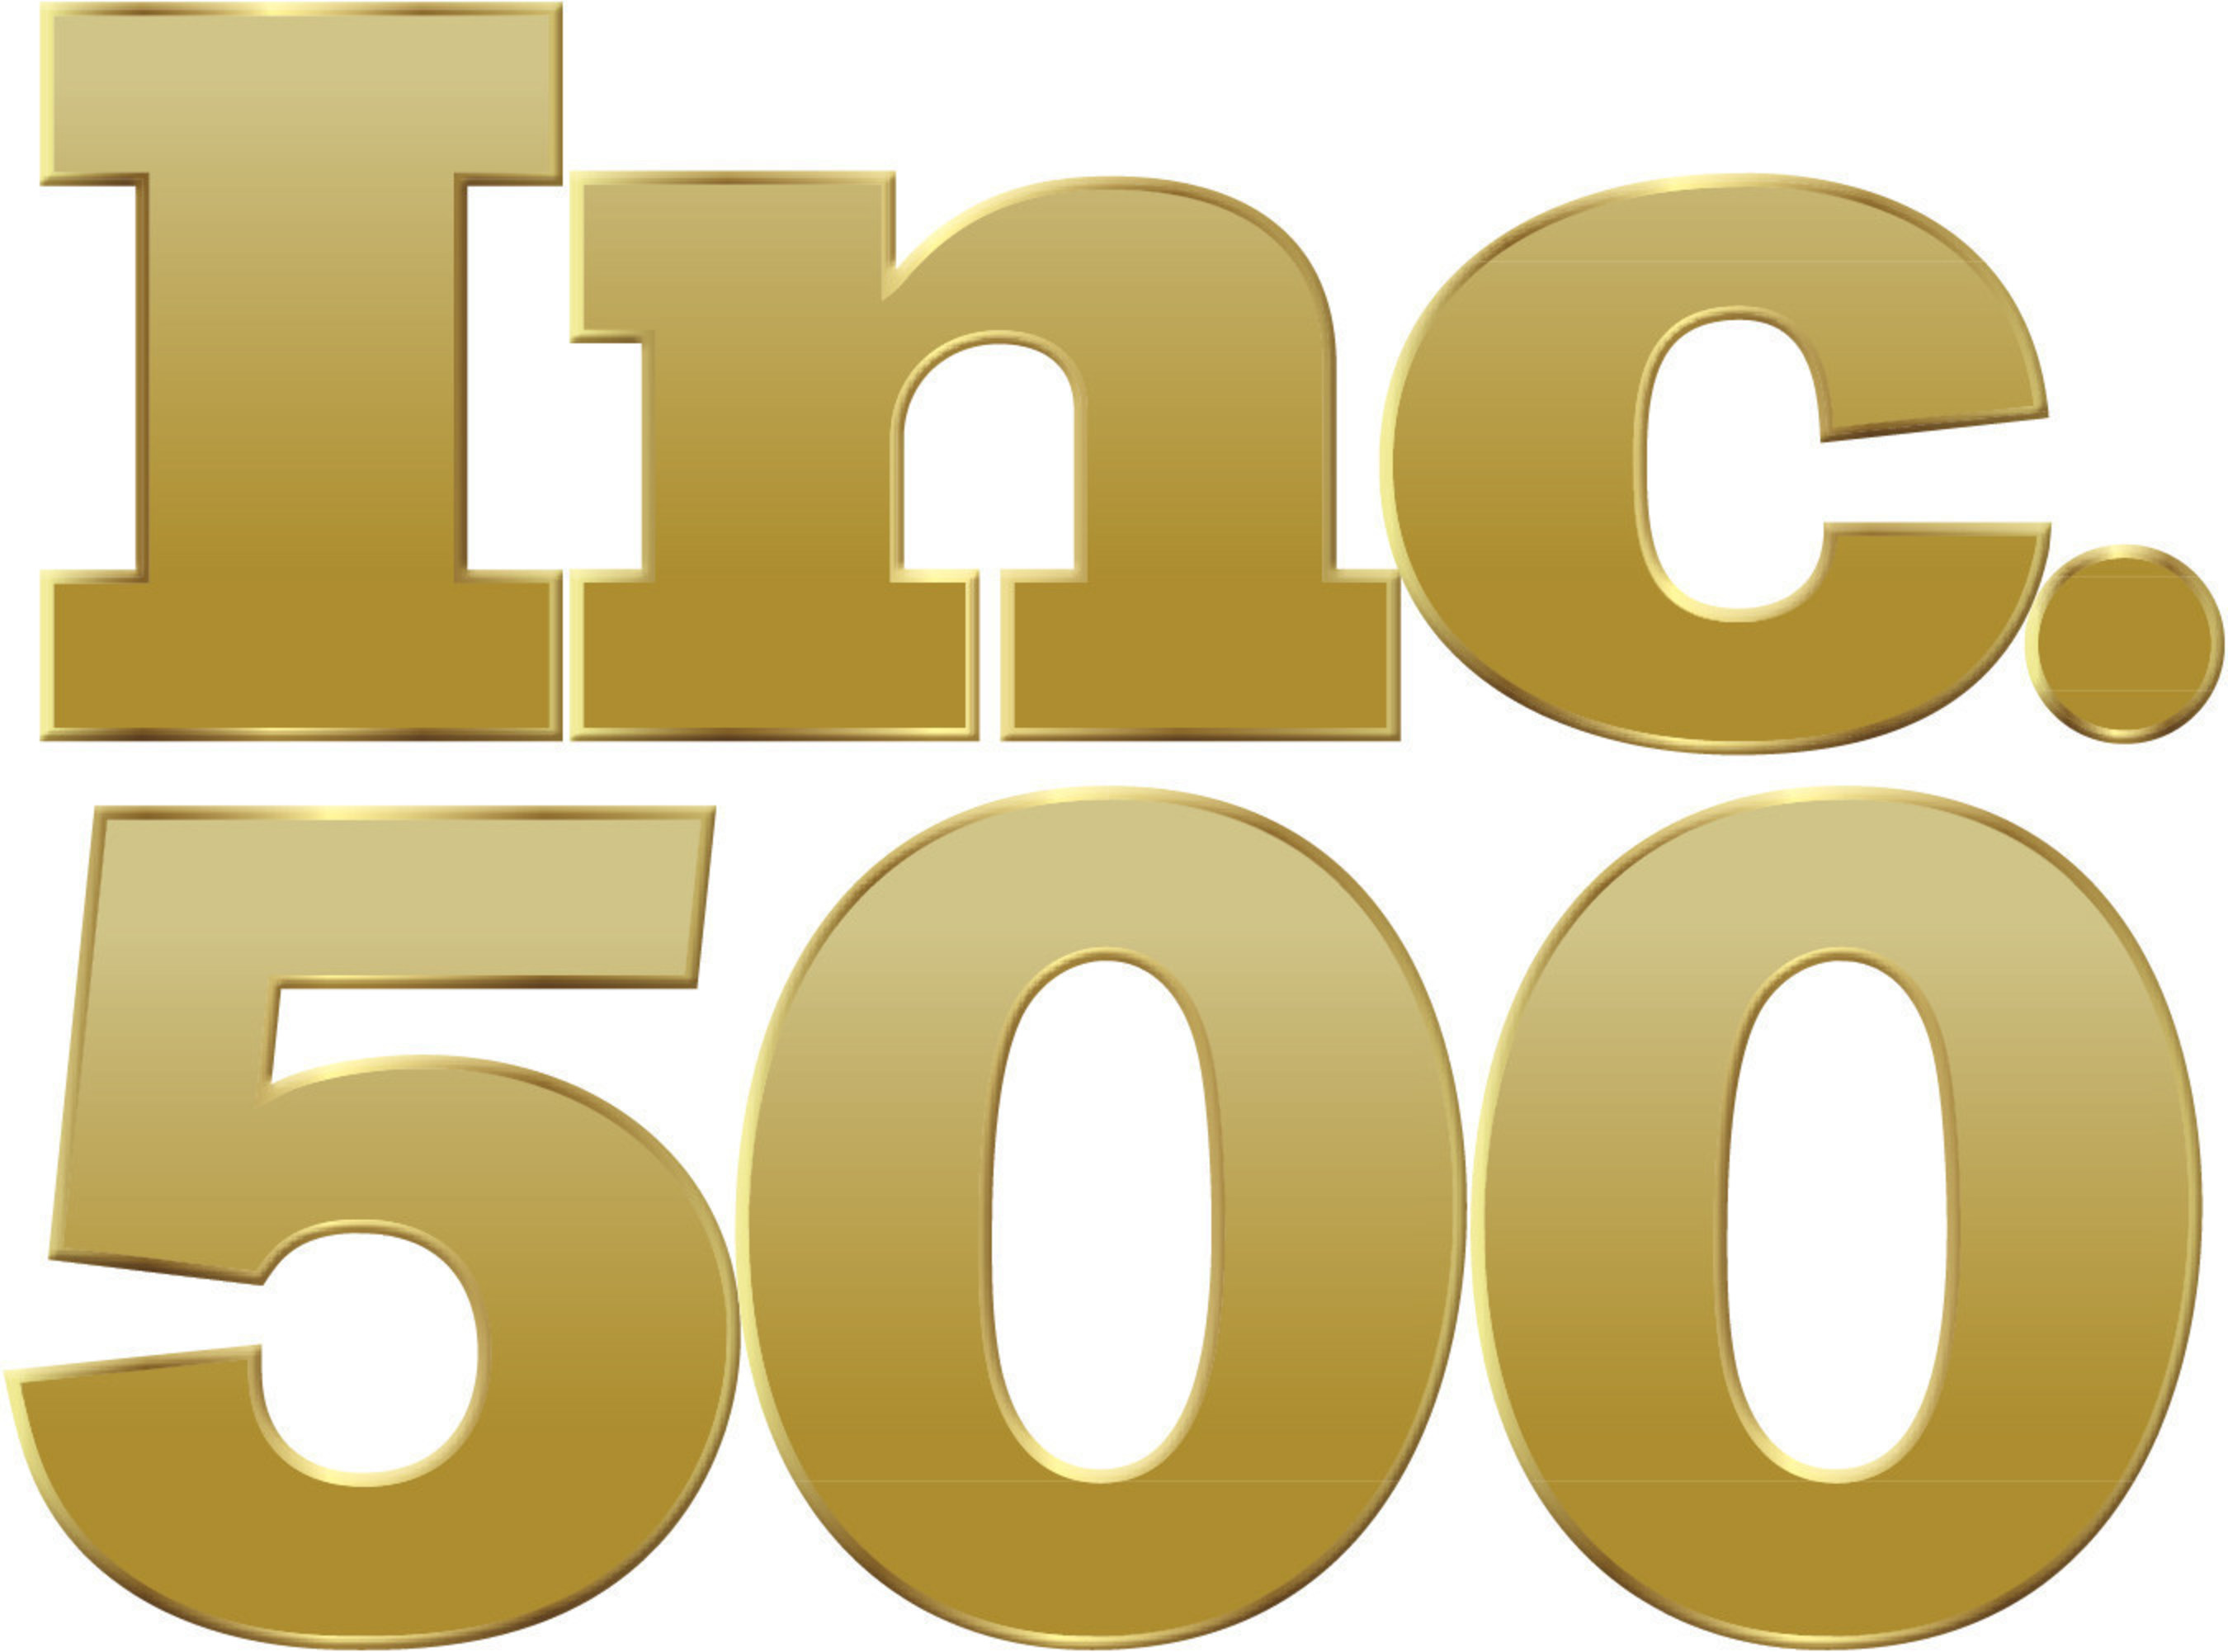 Neighbors Health, the parent company of Neighbors Emergency Center, has been named to the 2016 Inc.500 list by Inc. Magazine.